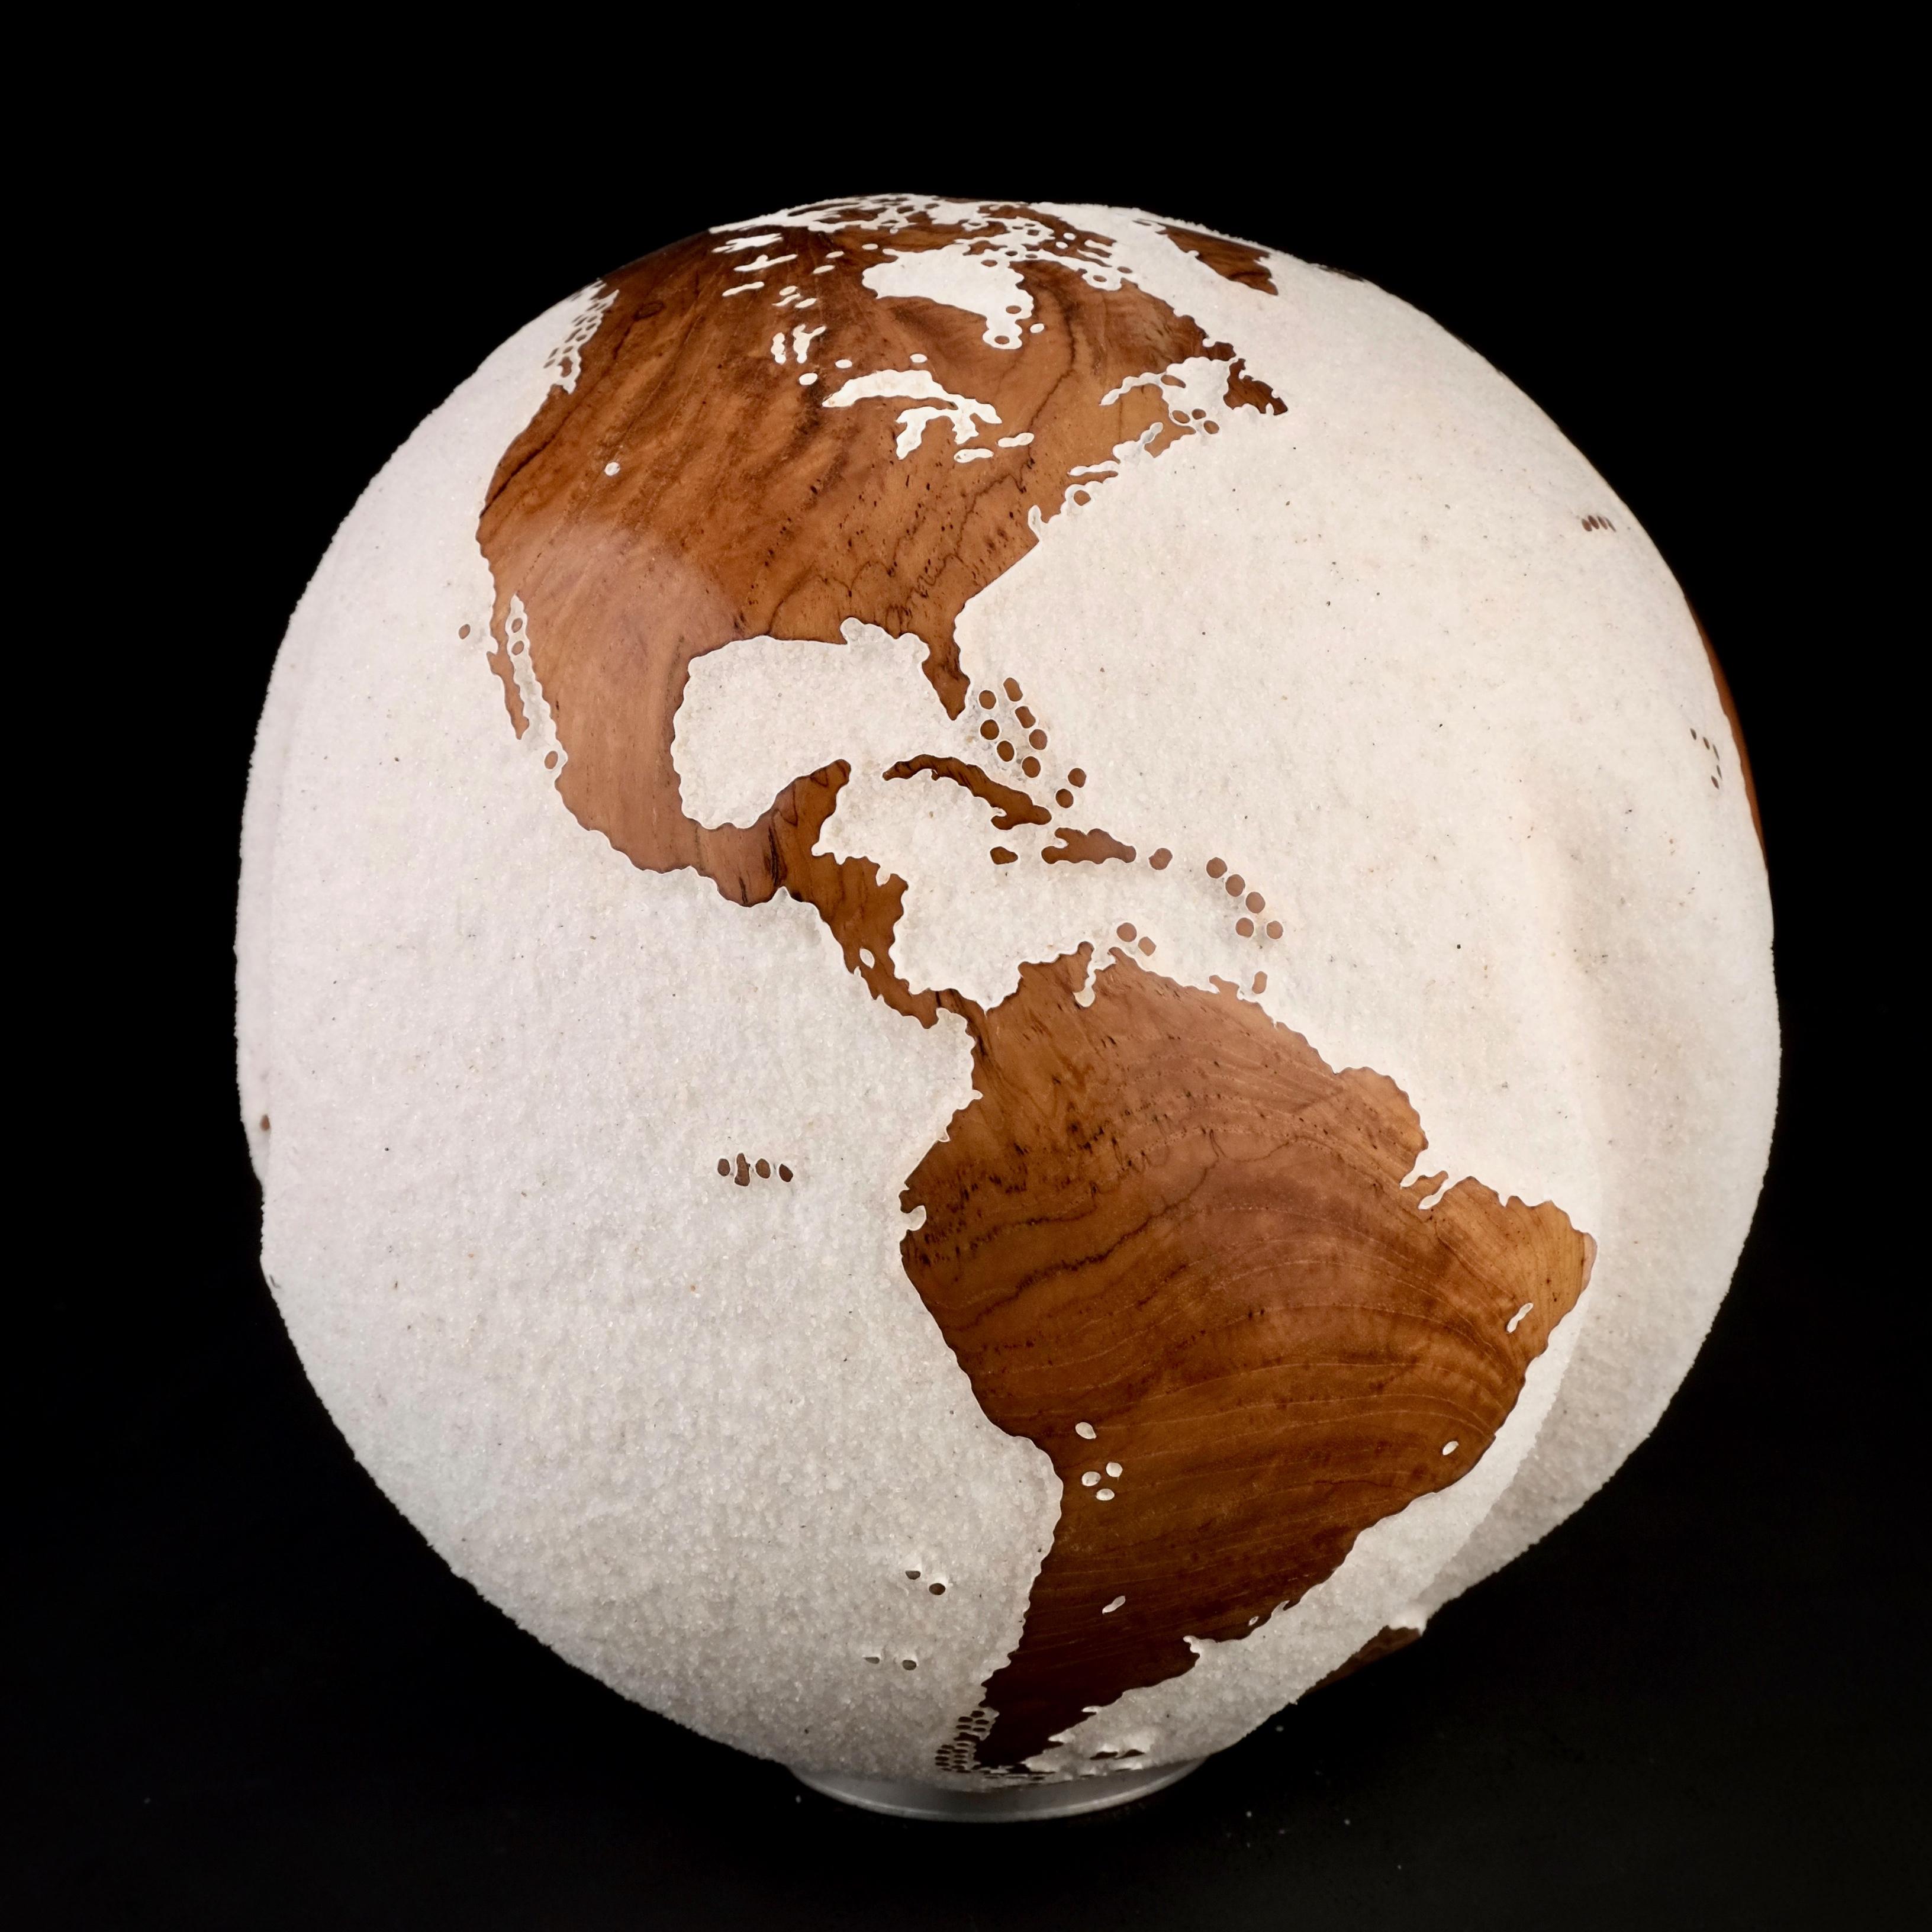 Teakwood and white lava sand make this beautiful turning globe a real stunning sculpture.
Made from a whole piece of wood the way the sculpture is shaped is defined by how the tree grew.
Sitting on a turning base the sculpture can spin silently